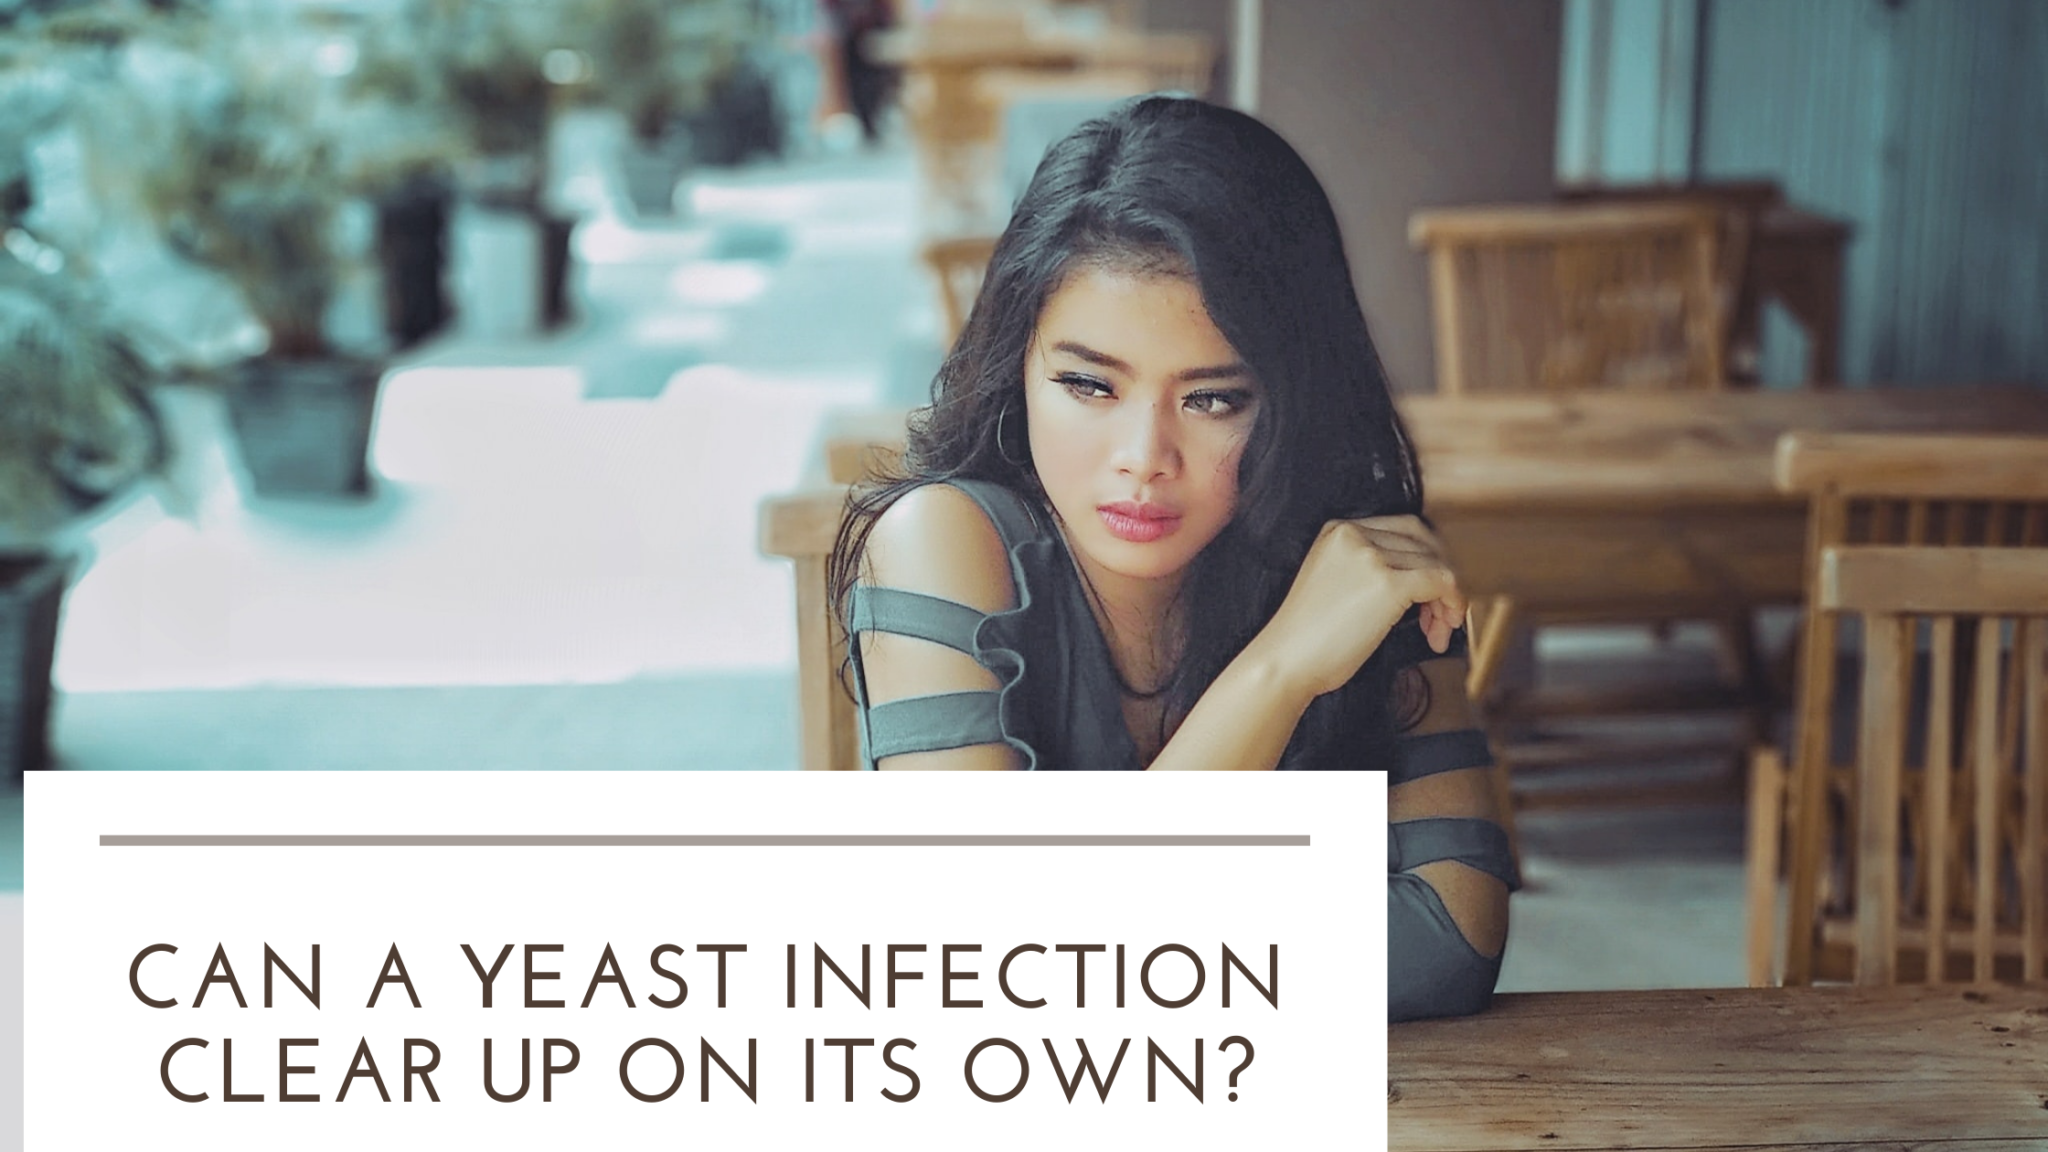 Can a Yeast Infection Clear Up On Its Own?